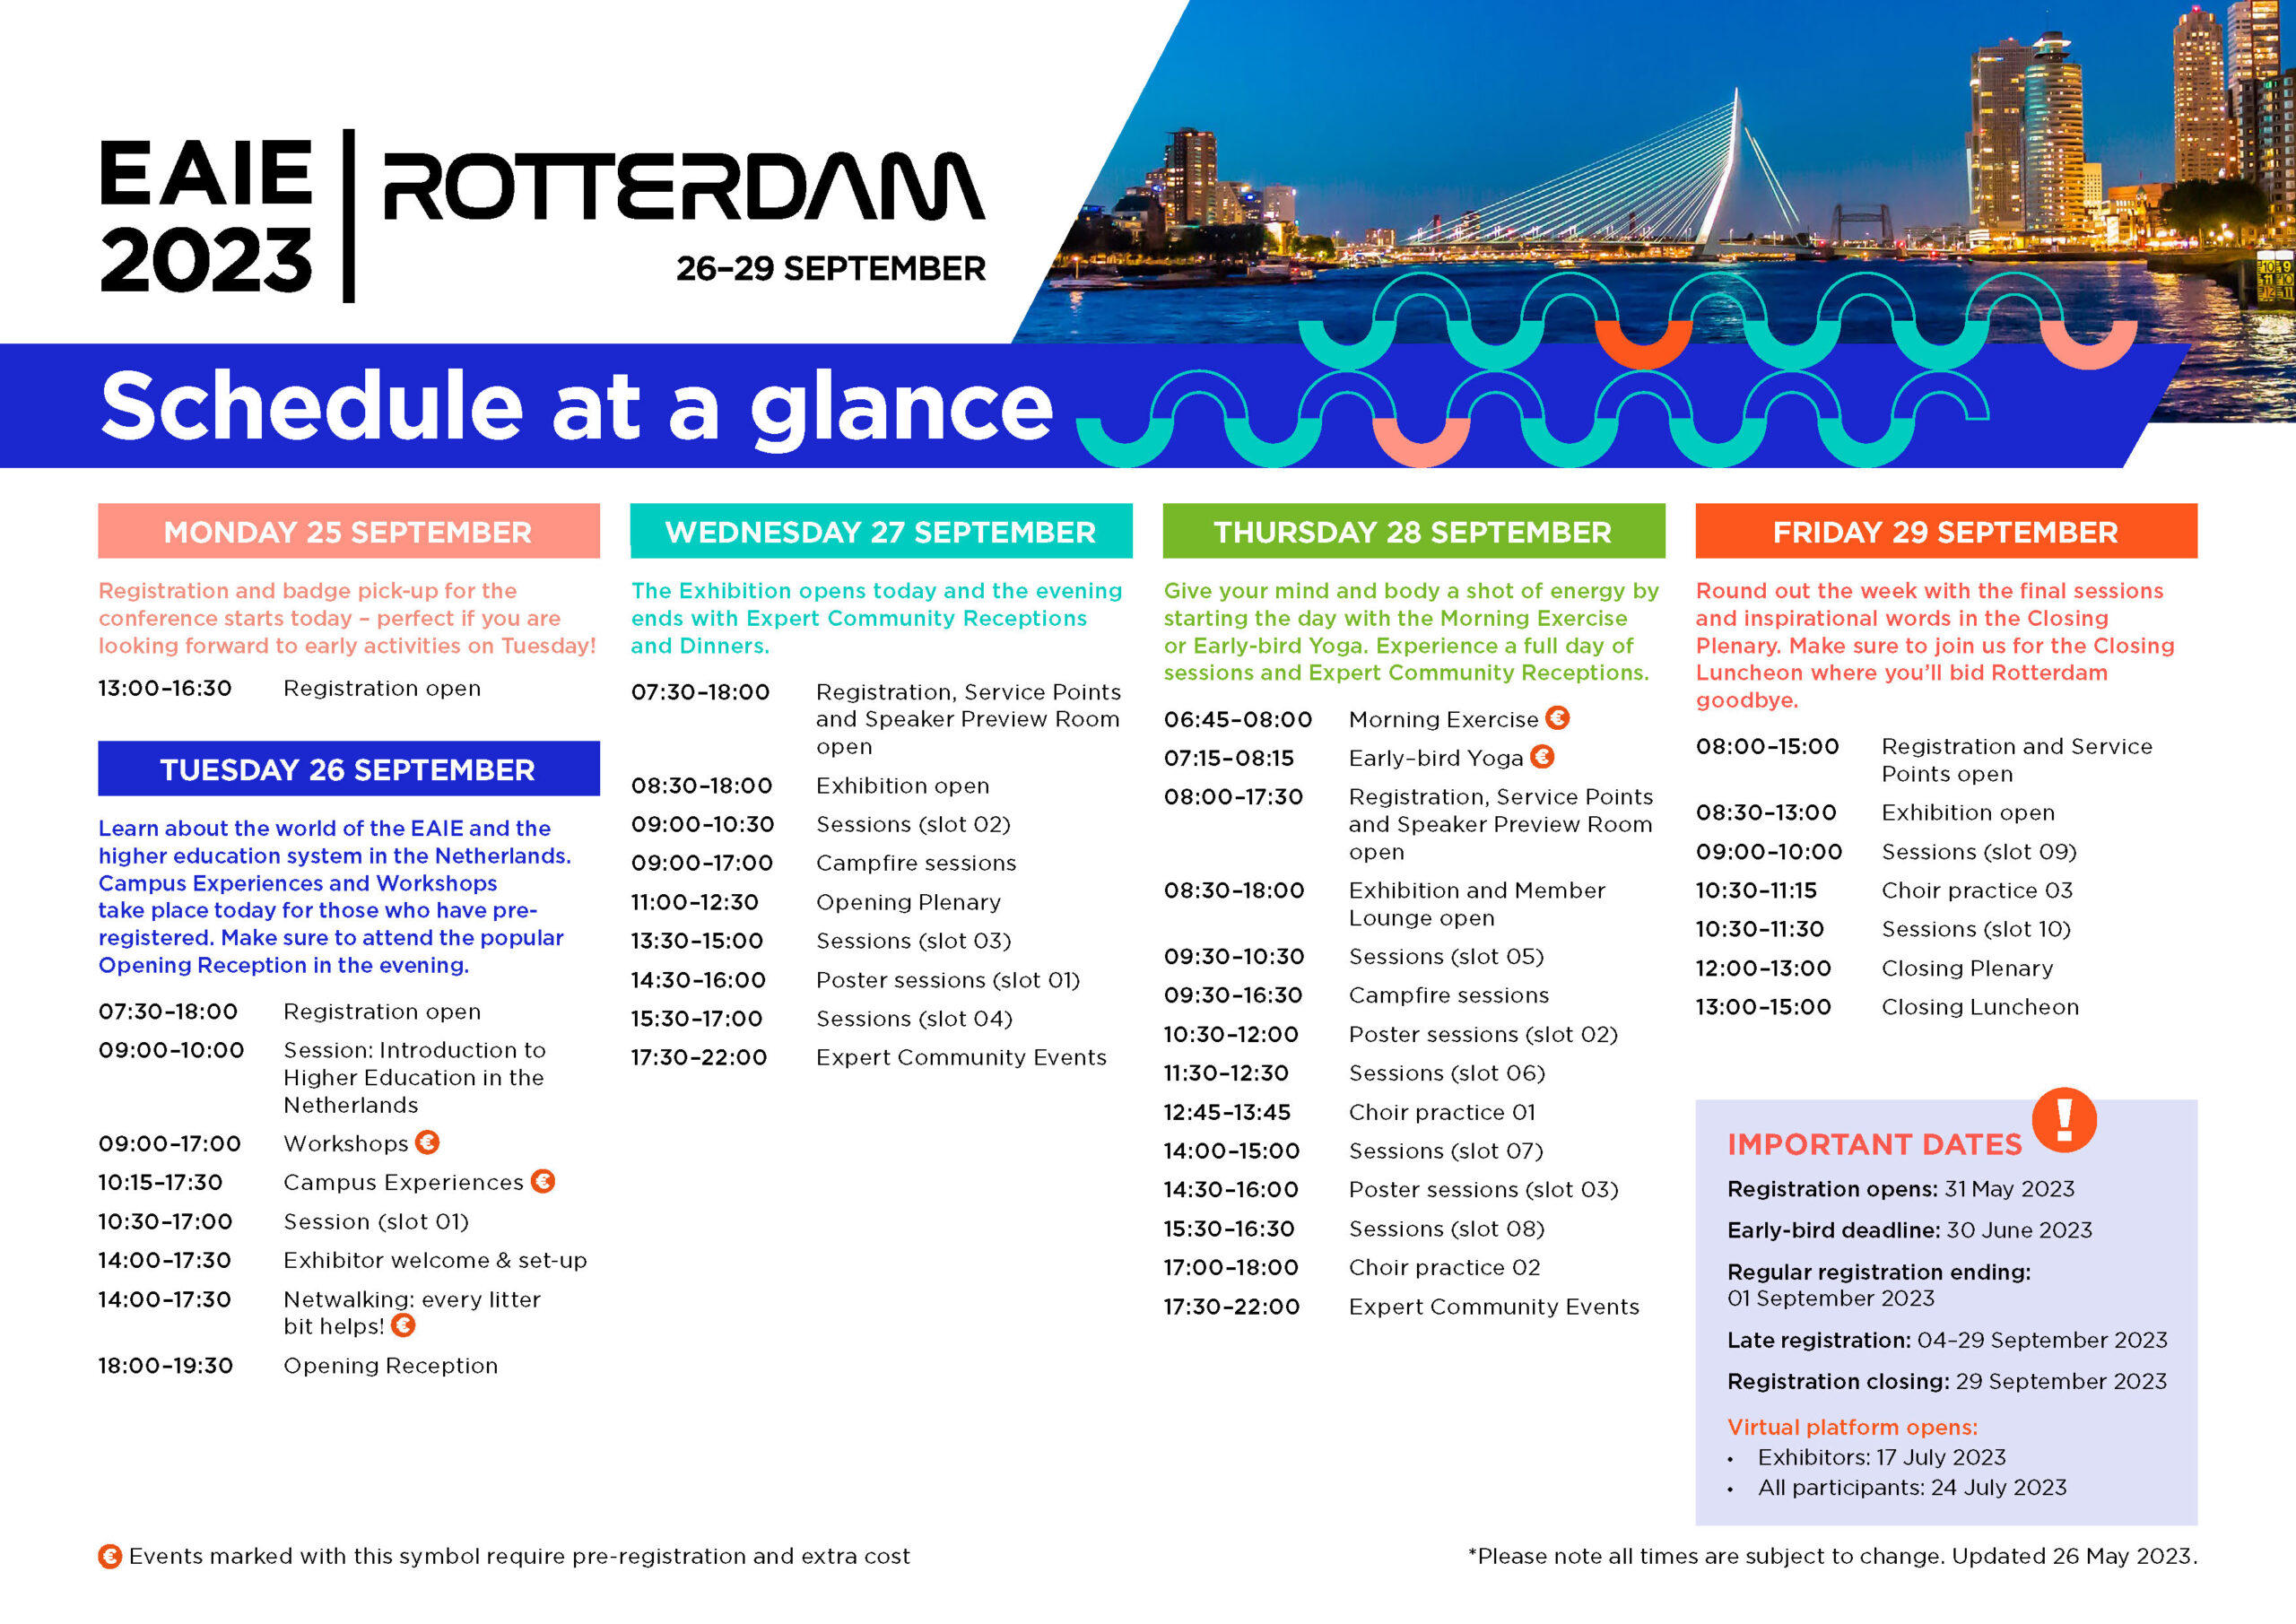 EAIE Rotterdam 2023_Schedule at a glance